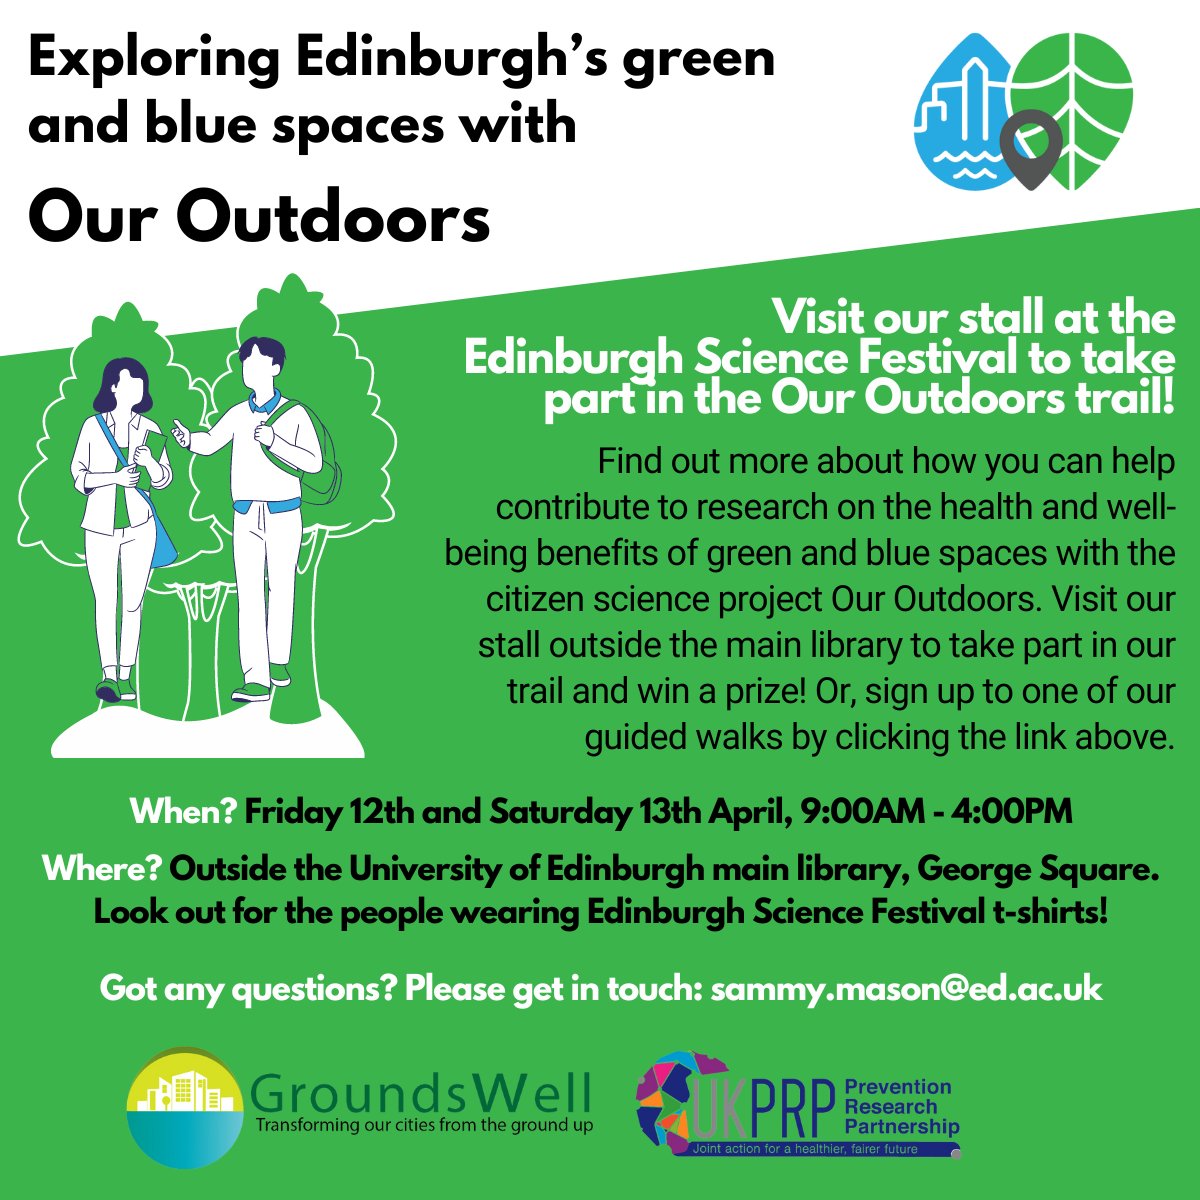 If you're in Edinburgh on Fri 12th or Sat 13th April then come and visit our stall as part of the @EdSciFest! Find out more about our citizen science project @OurOutdoorsUK, complete our trail to win a prize, or sign up to one of our guided walks: tinyurl.com/4f25f3rm 🌻🥾🌳